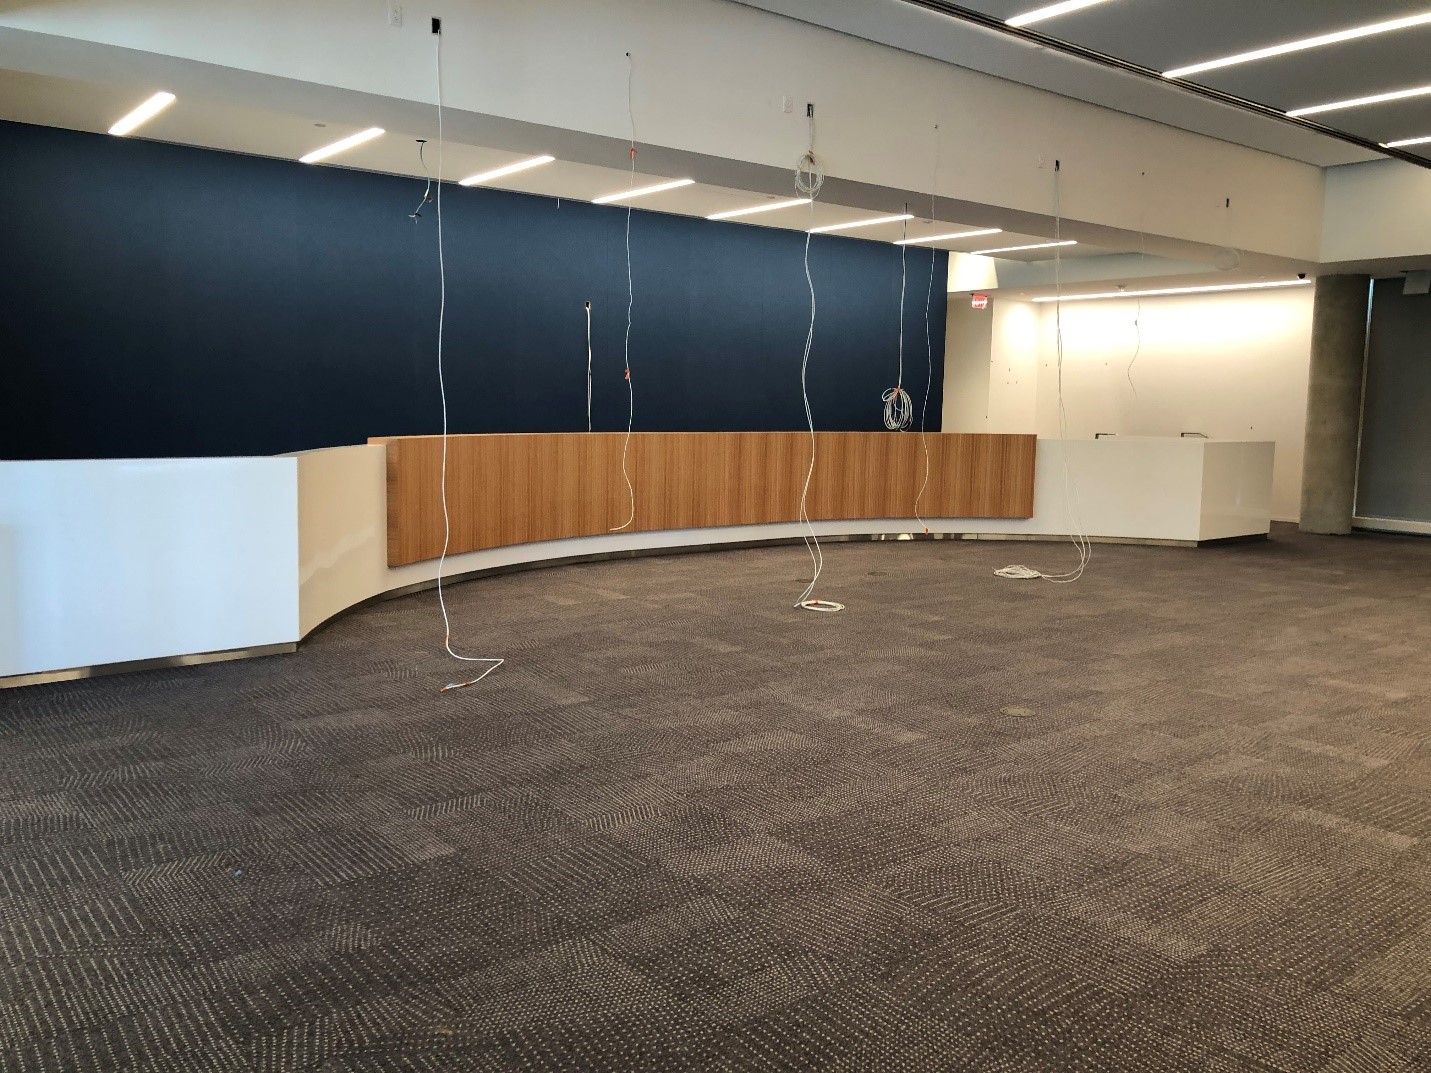 Hearing Room (Nearly complete)